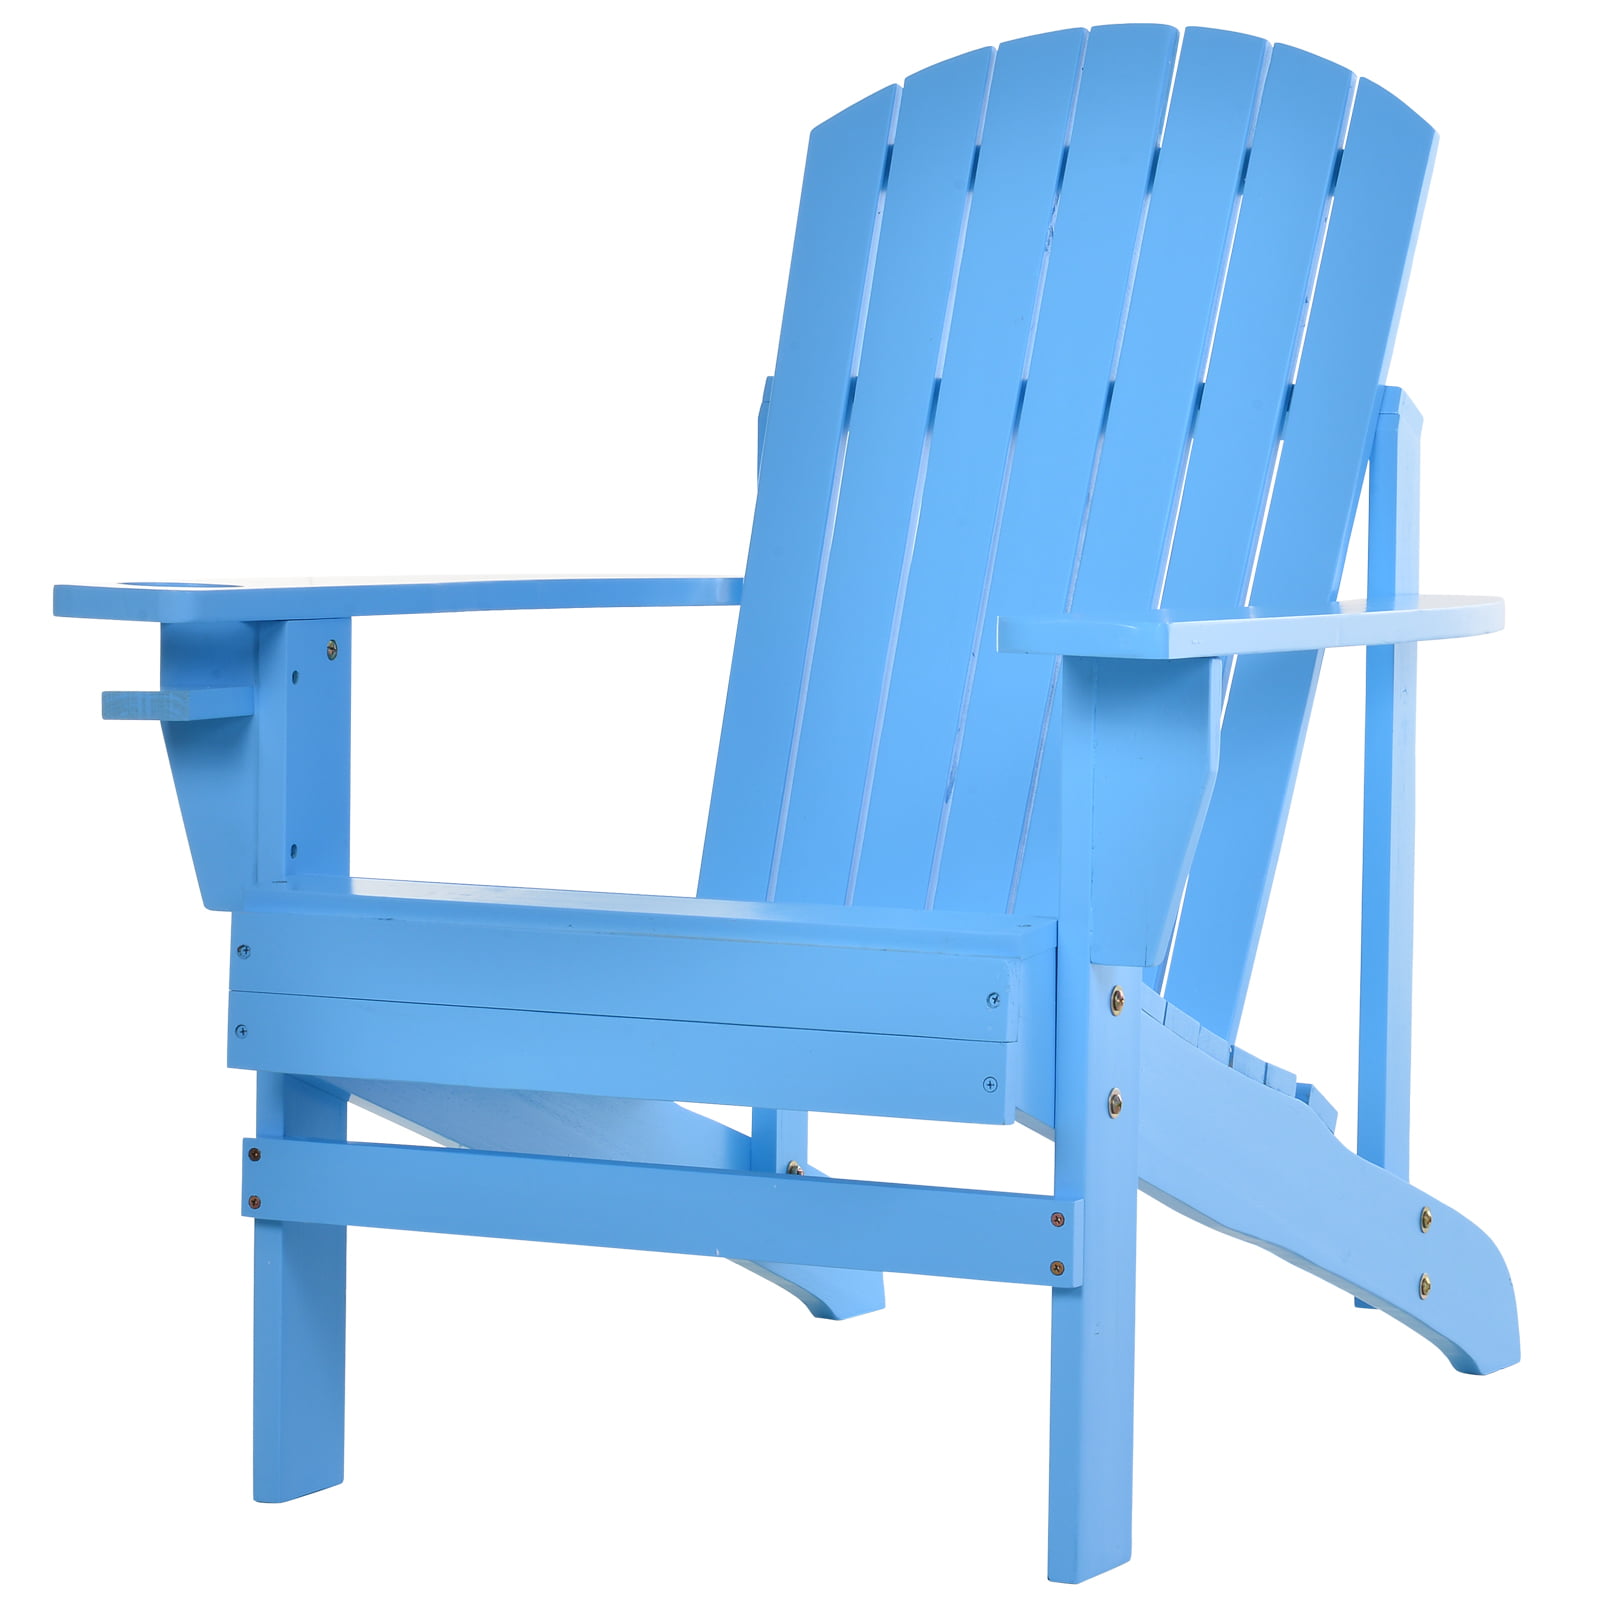 Wood Adirondack Chair Outdoor Patio Chaise Lounge Deck Reclined Bench Porch